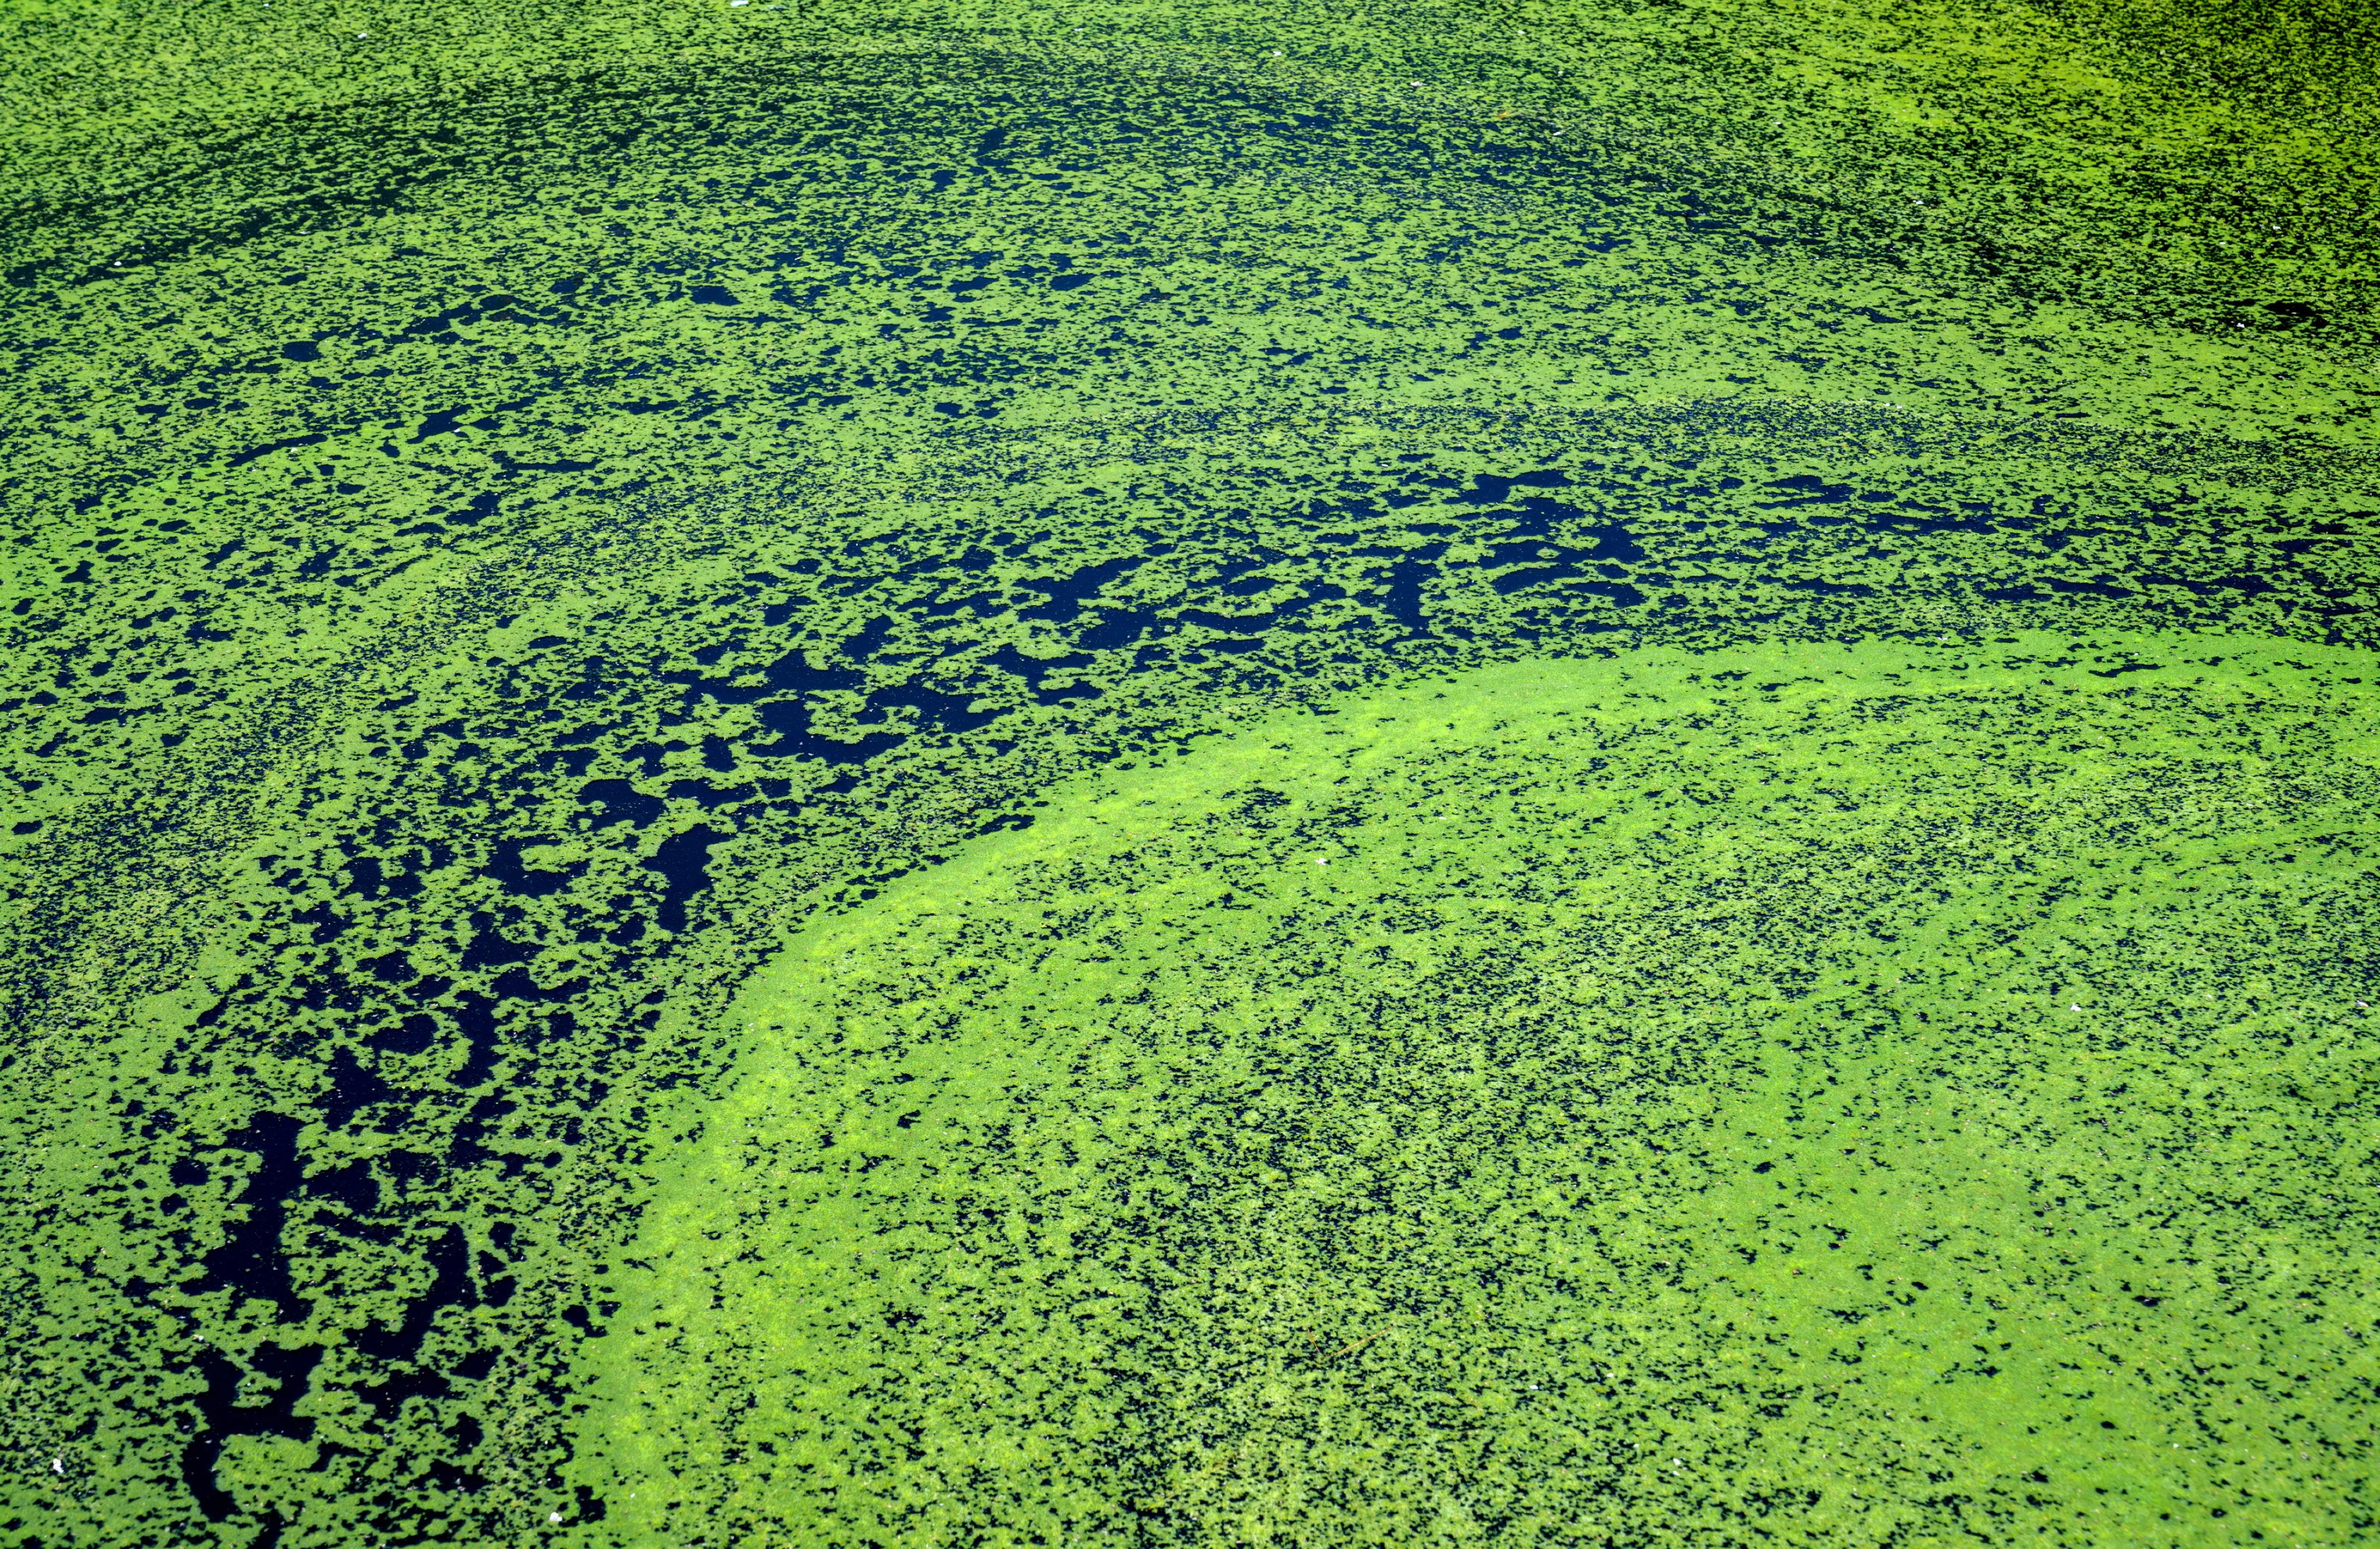 During an algae bloom, cyanobacteria, commonly known as blue-green algae, develop at the surface of the water and prevent access to light and oxygen for other organisms.